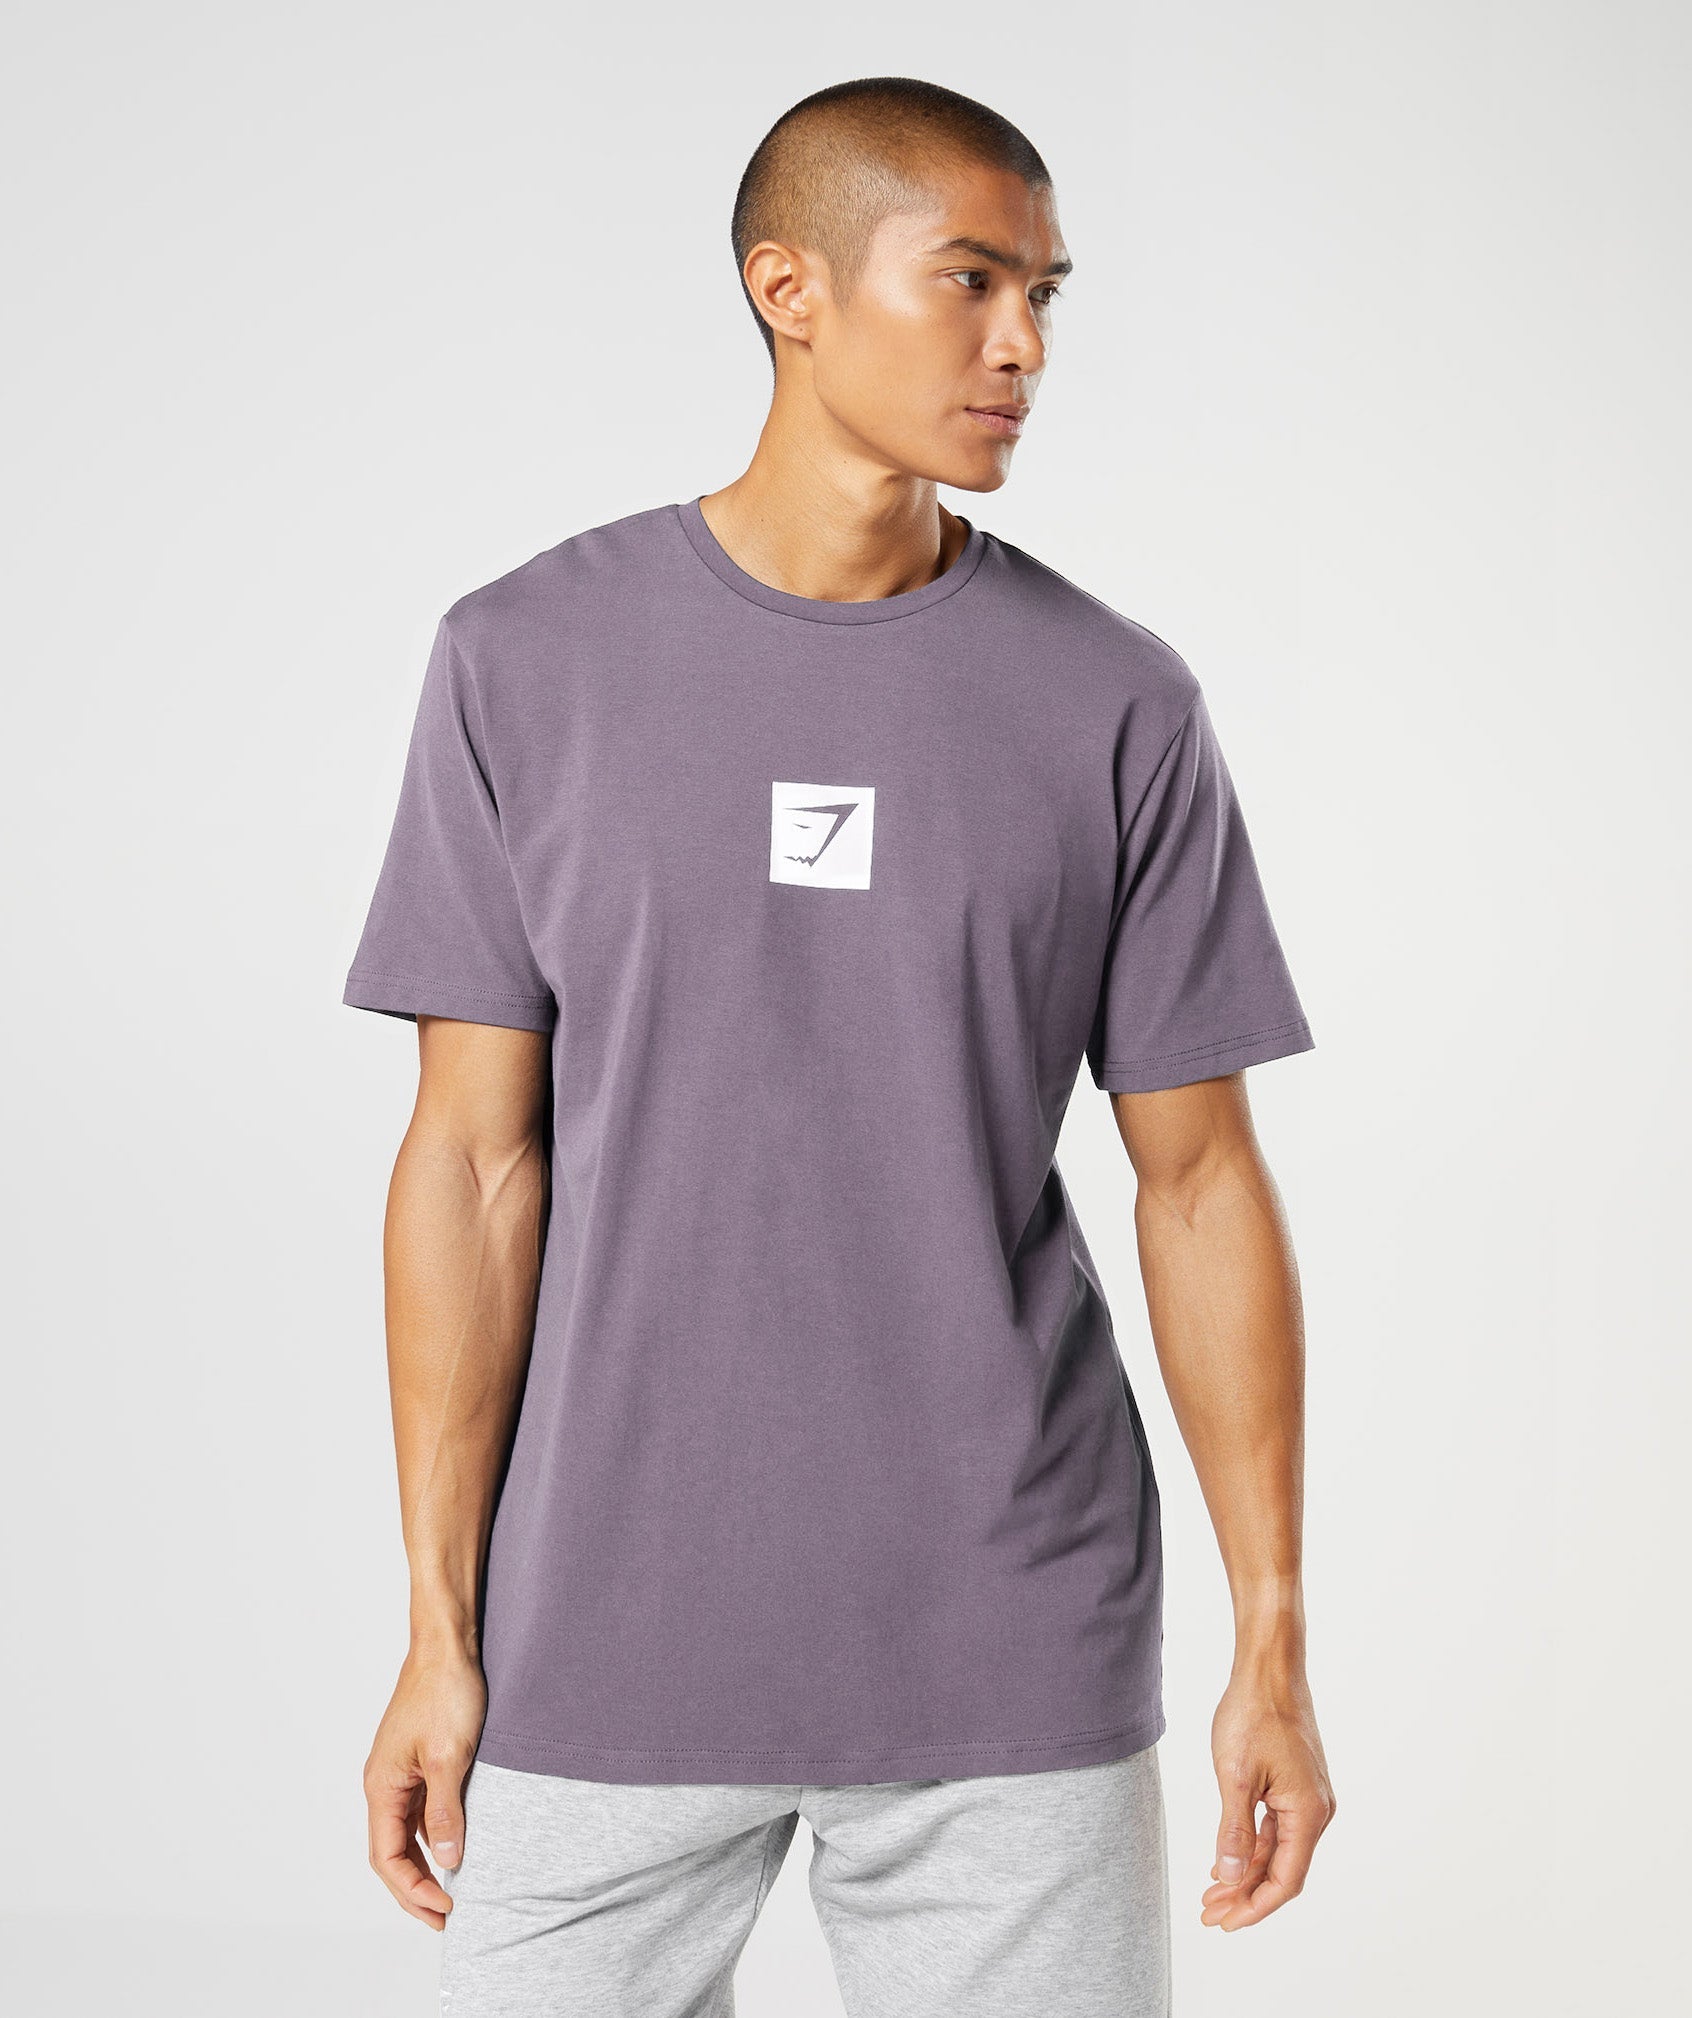 Outline T-Shirt in Musk Lilac